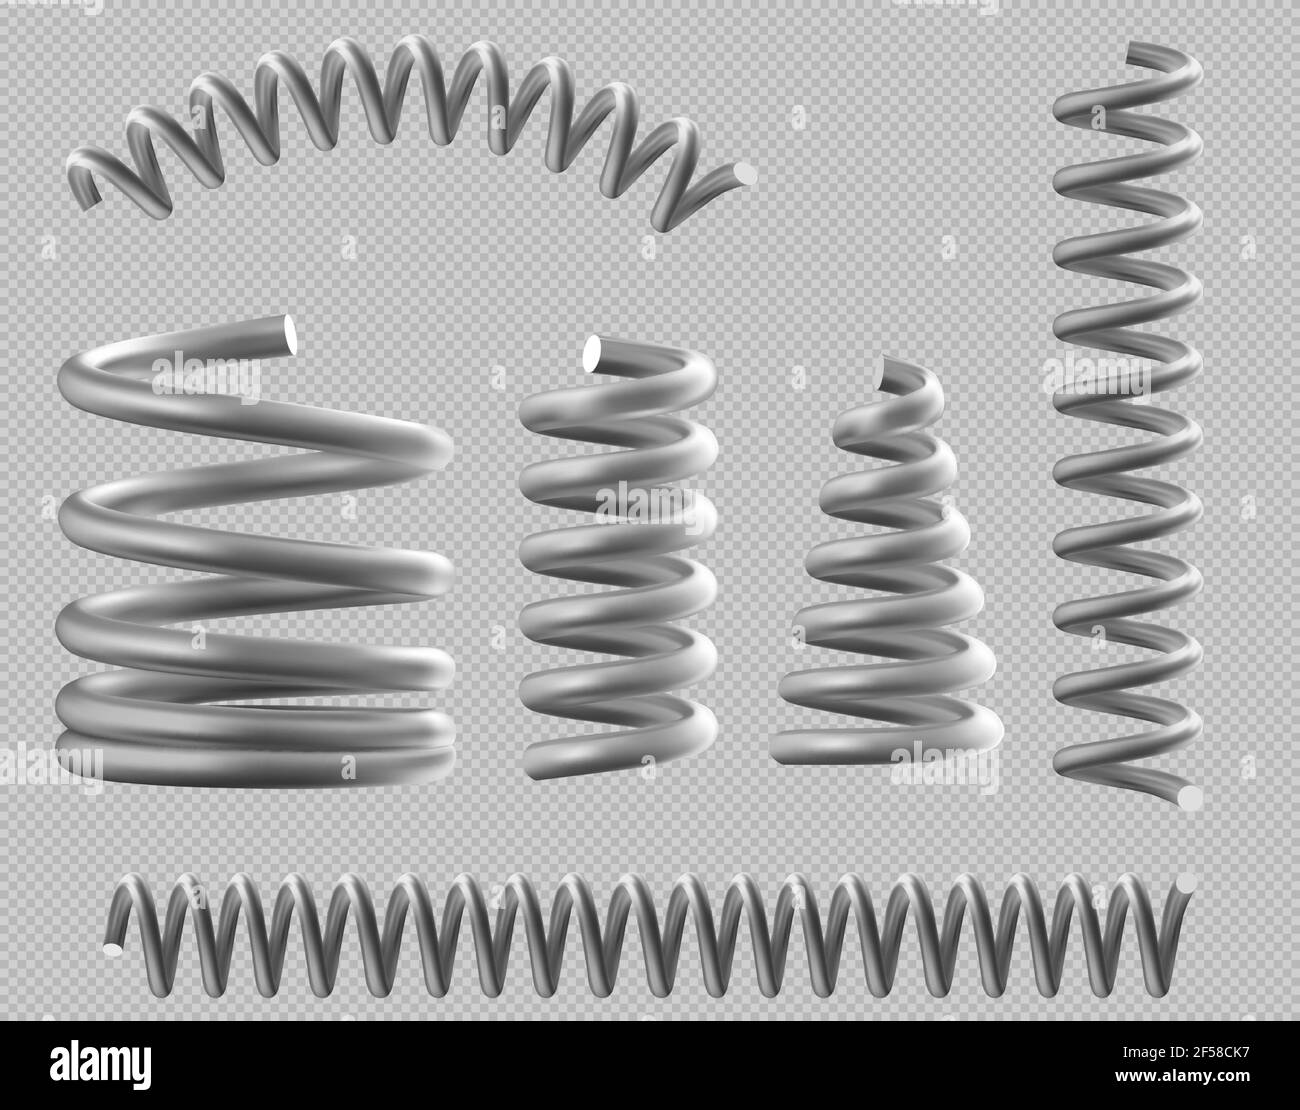 Metal springs, realistic coils for bed or car set Stock Vector